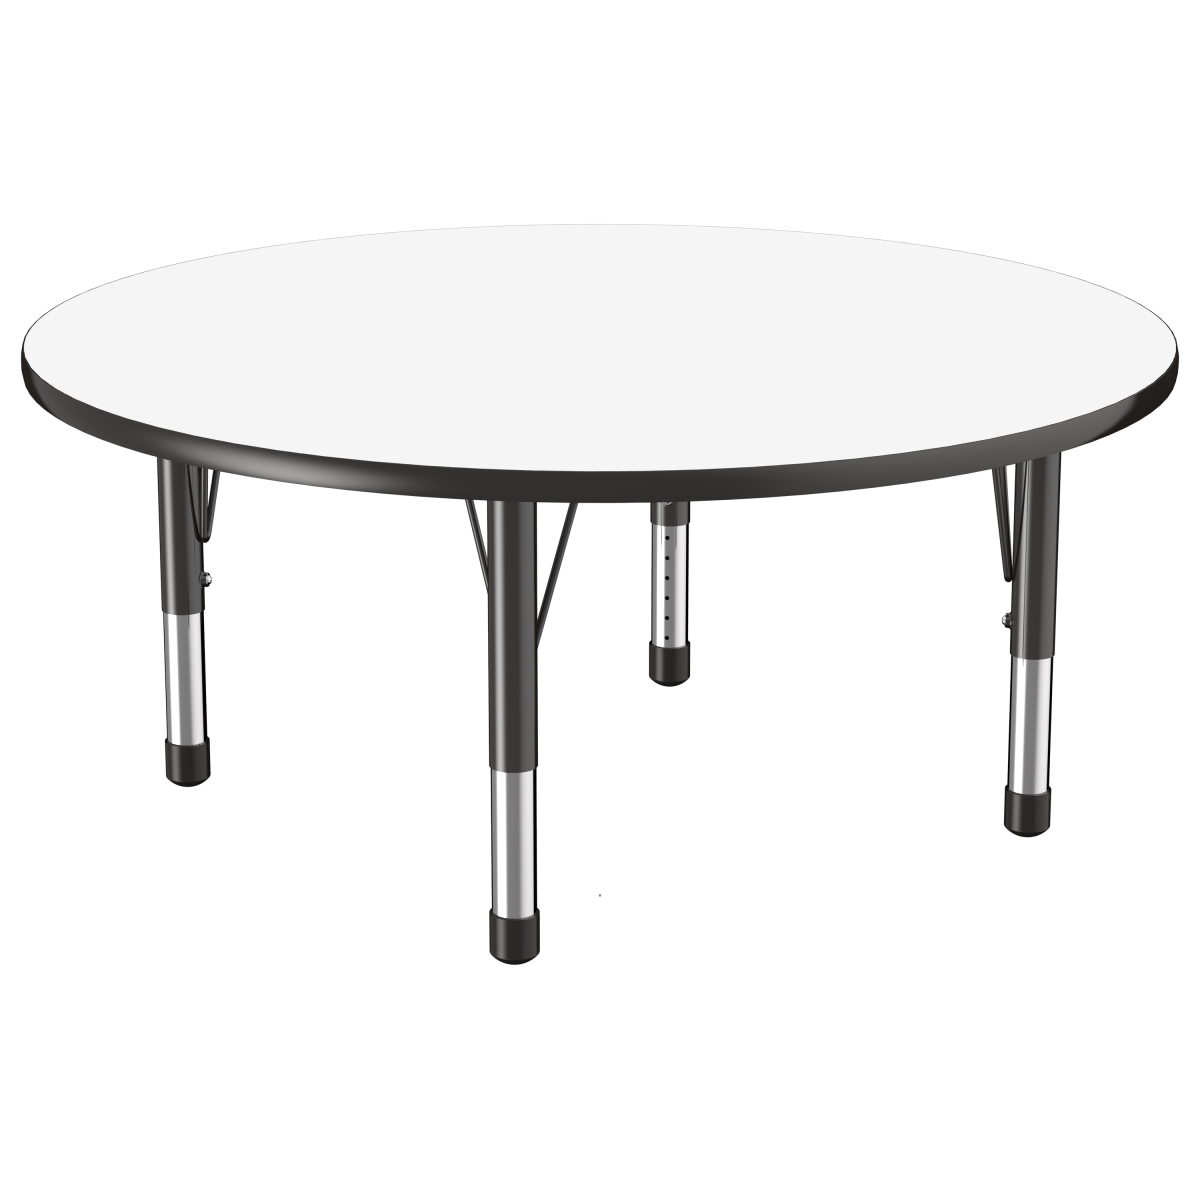 10198-debk 48 In. Round Dry-erase Adjustable Activity Table With Chunky Leg - Black